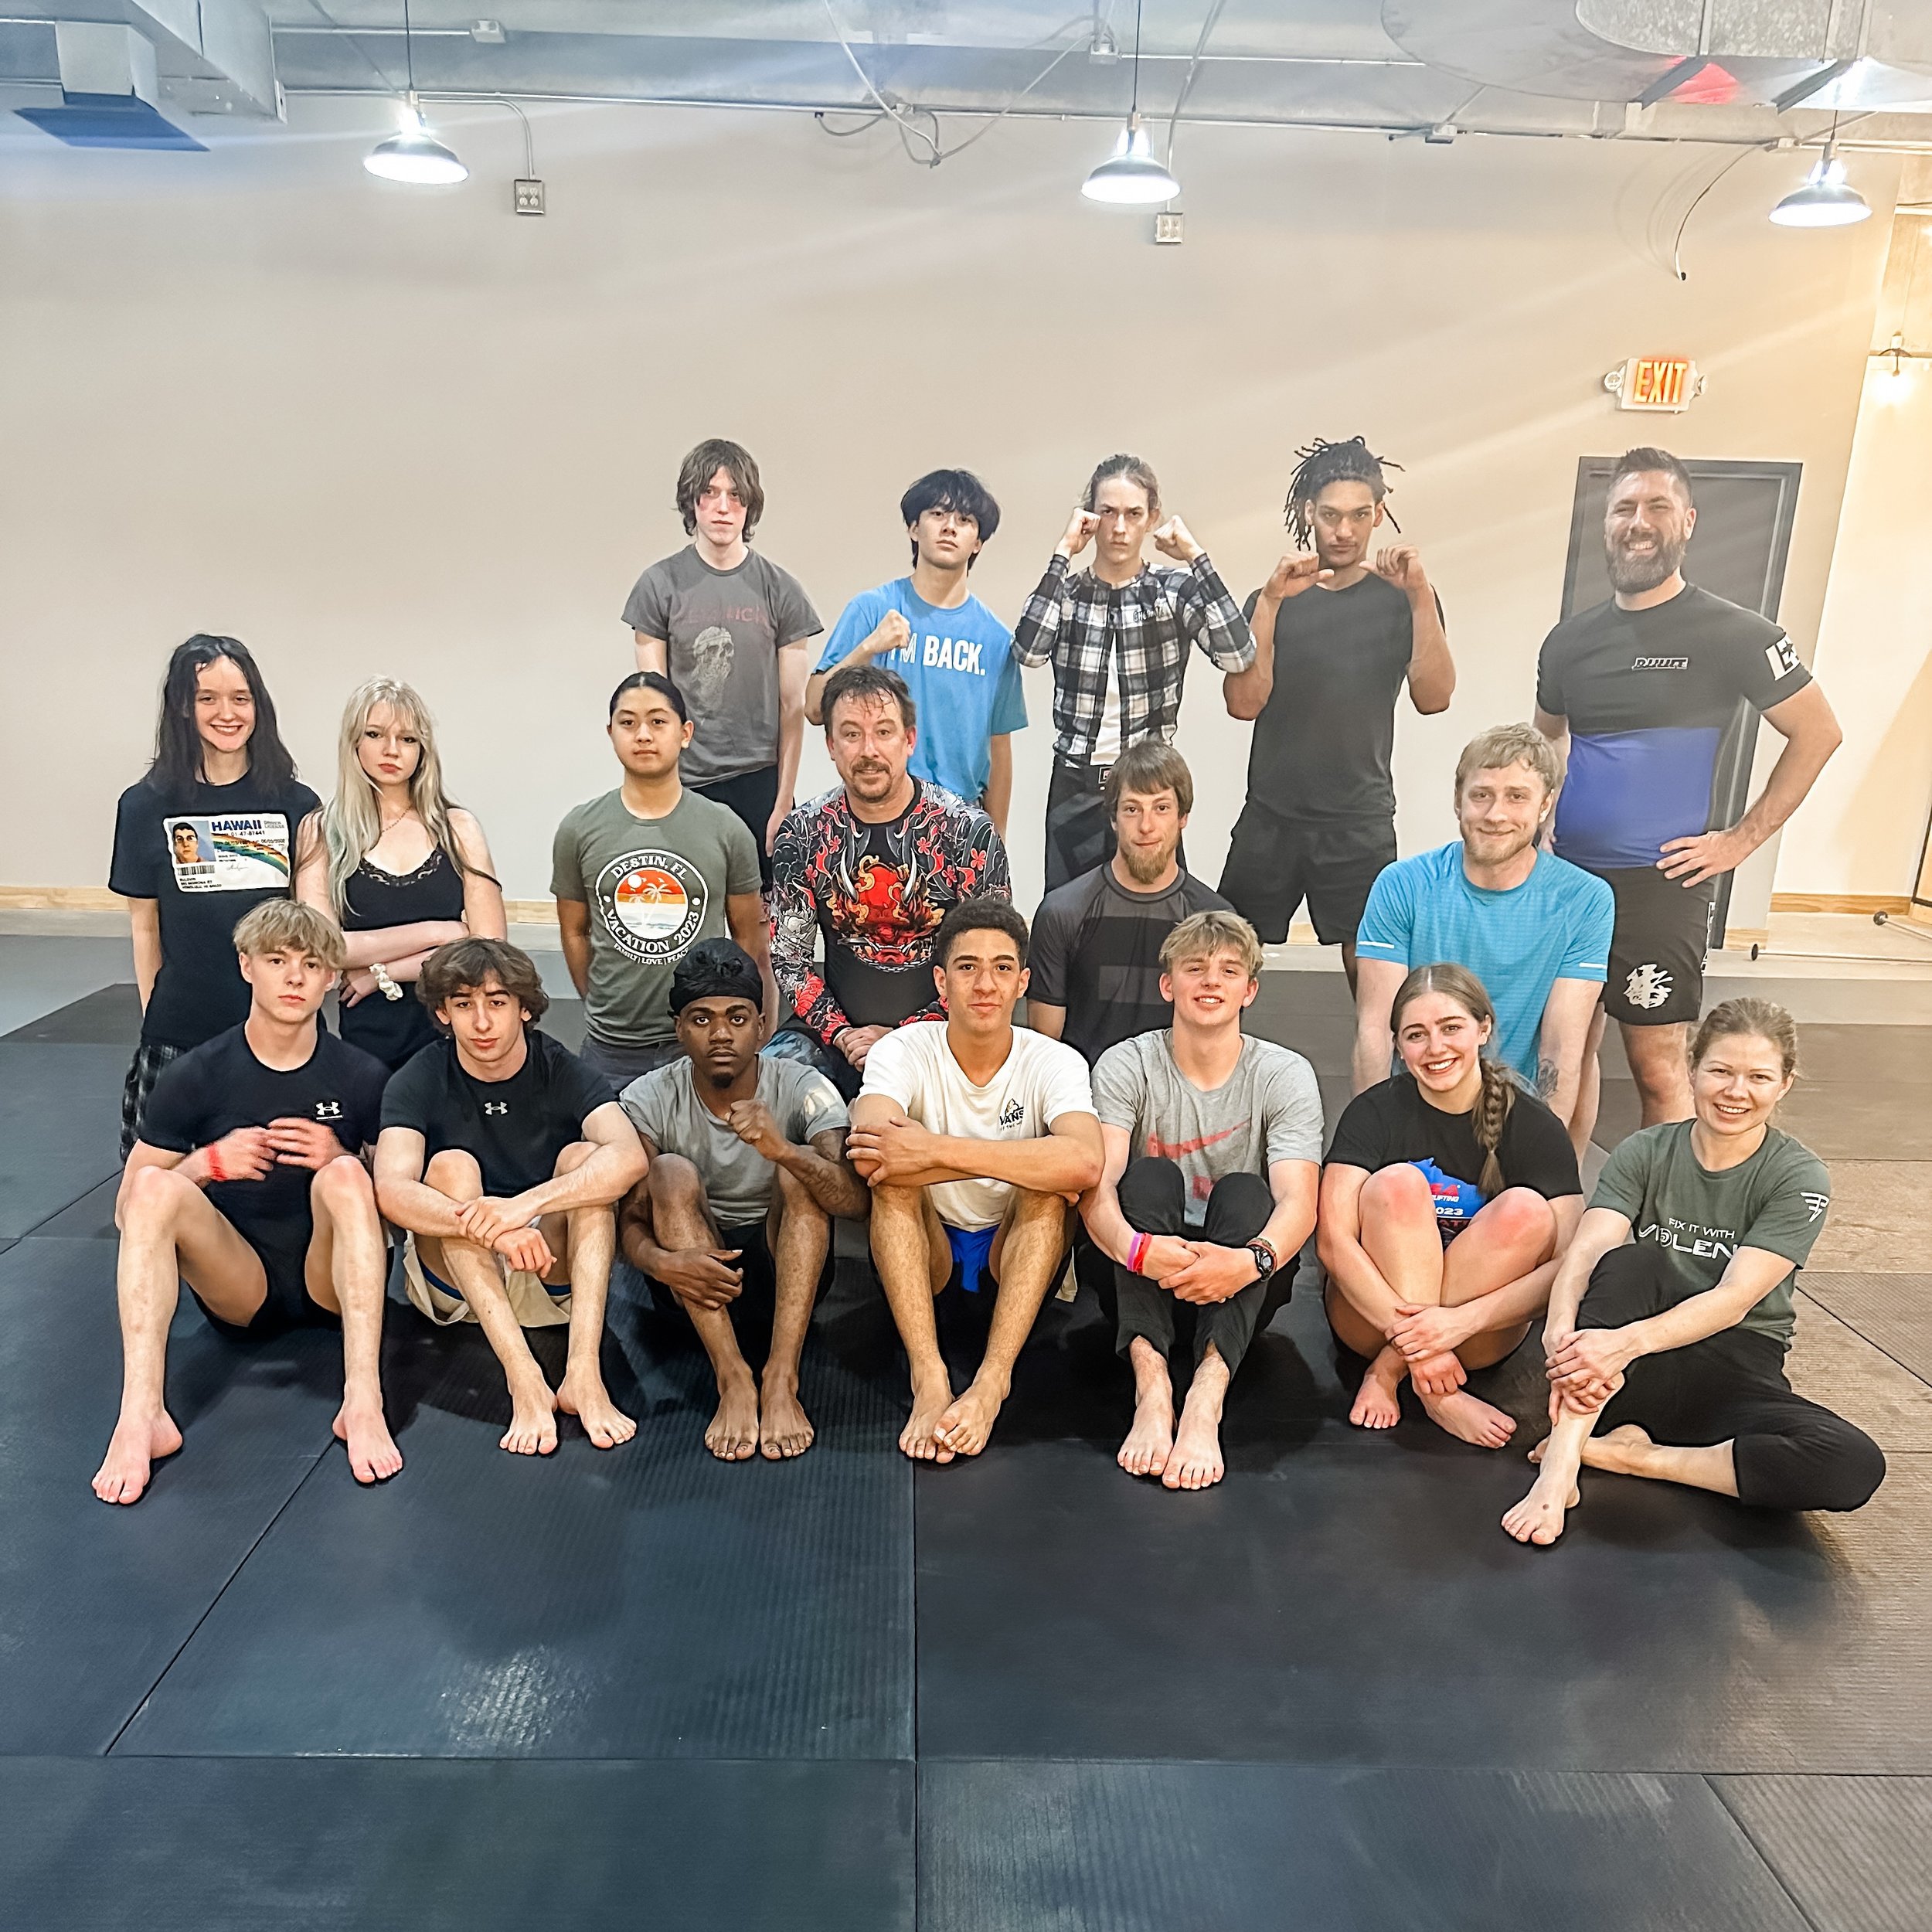 Last night&rsquo;s NoGi group was amazing!! One of our members blew up our numbers and brought a bunch of his friends to class. The more the merrier on our newly-framed mat space 🥳🤙🏼

#Fortitude #kravmaga #bjj #downtown #neenah #wisconsin #selfdef